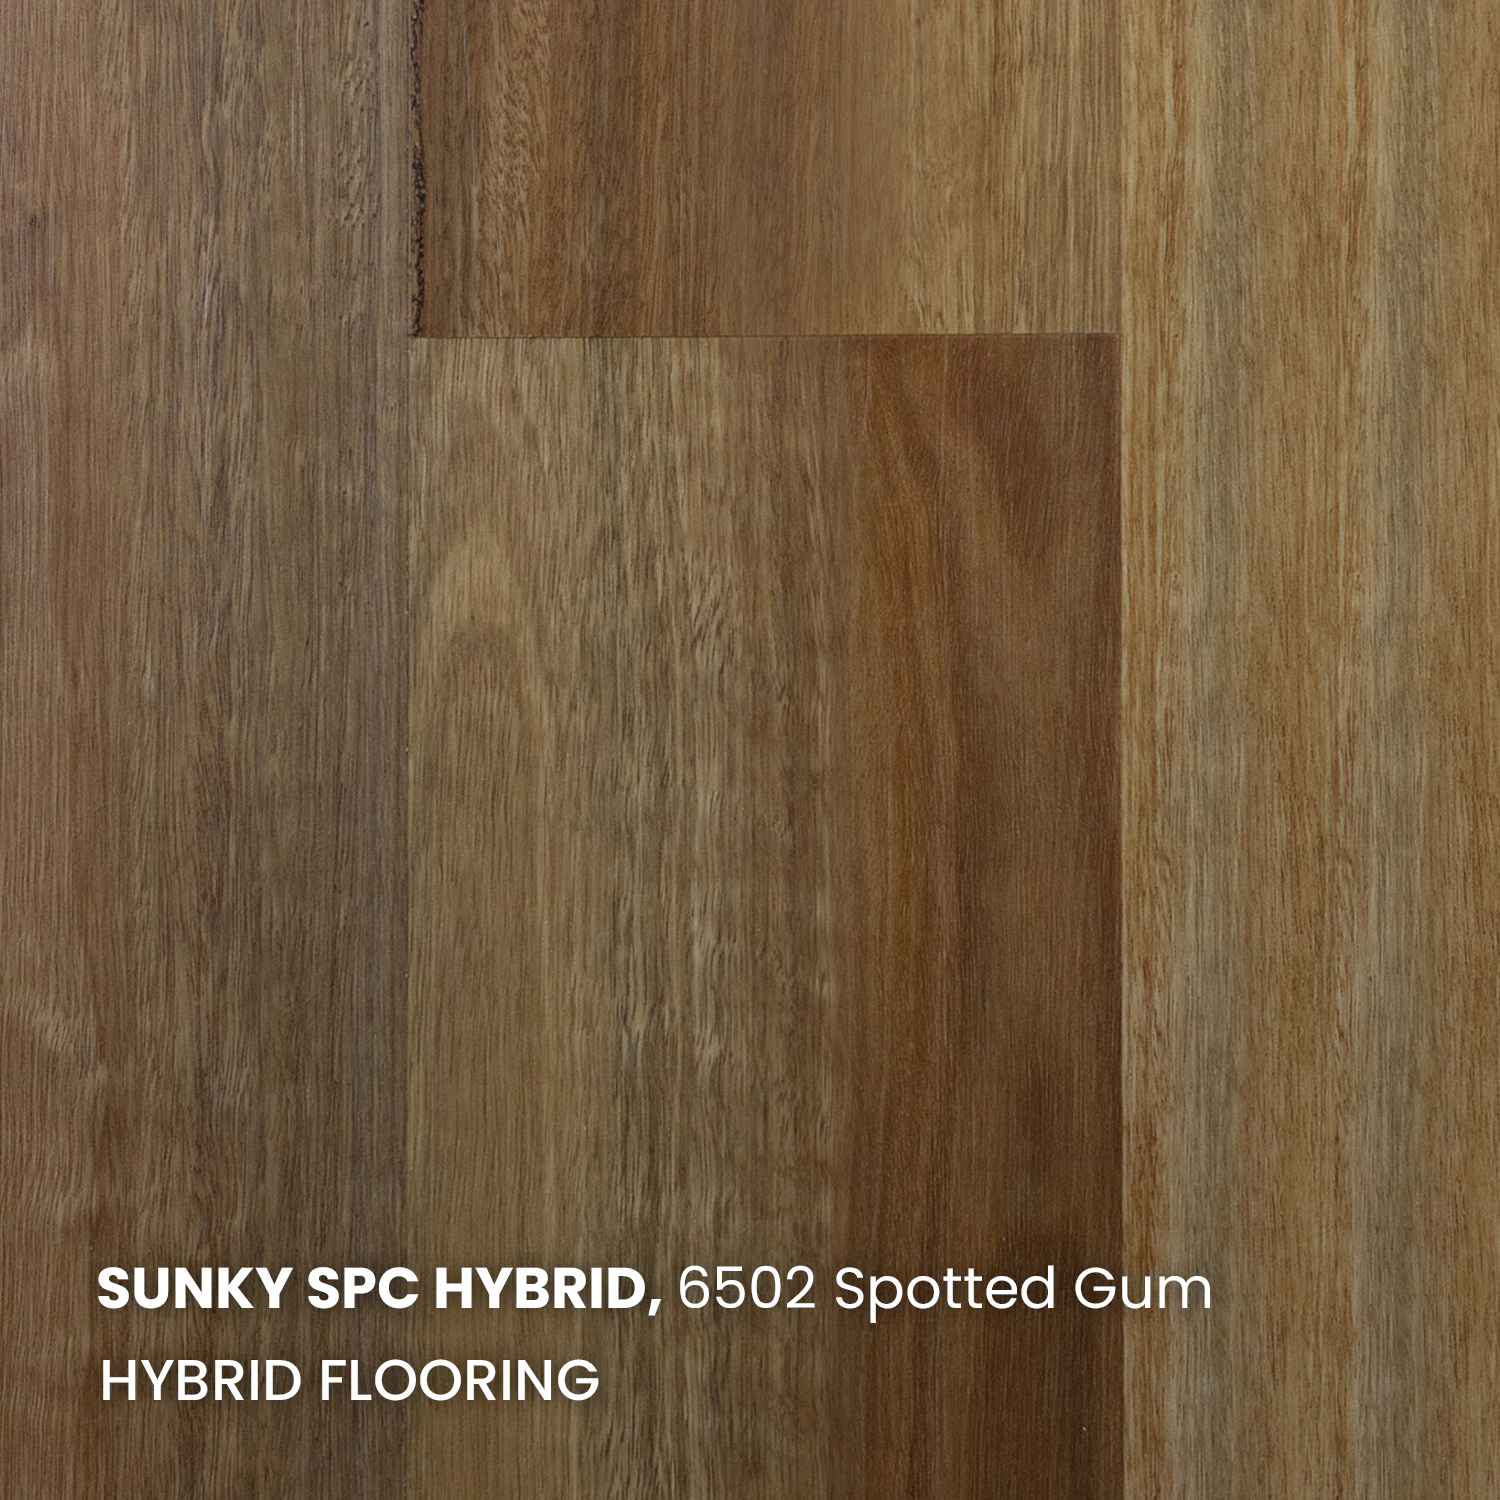 6502 Spotted Gum